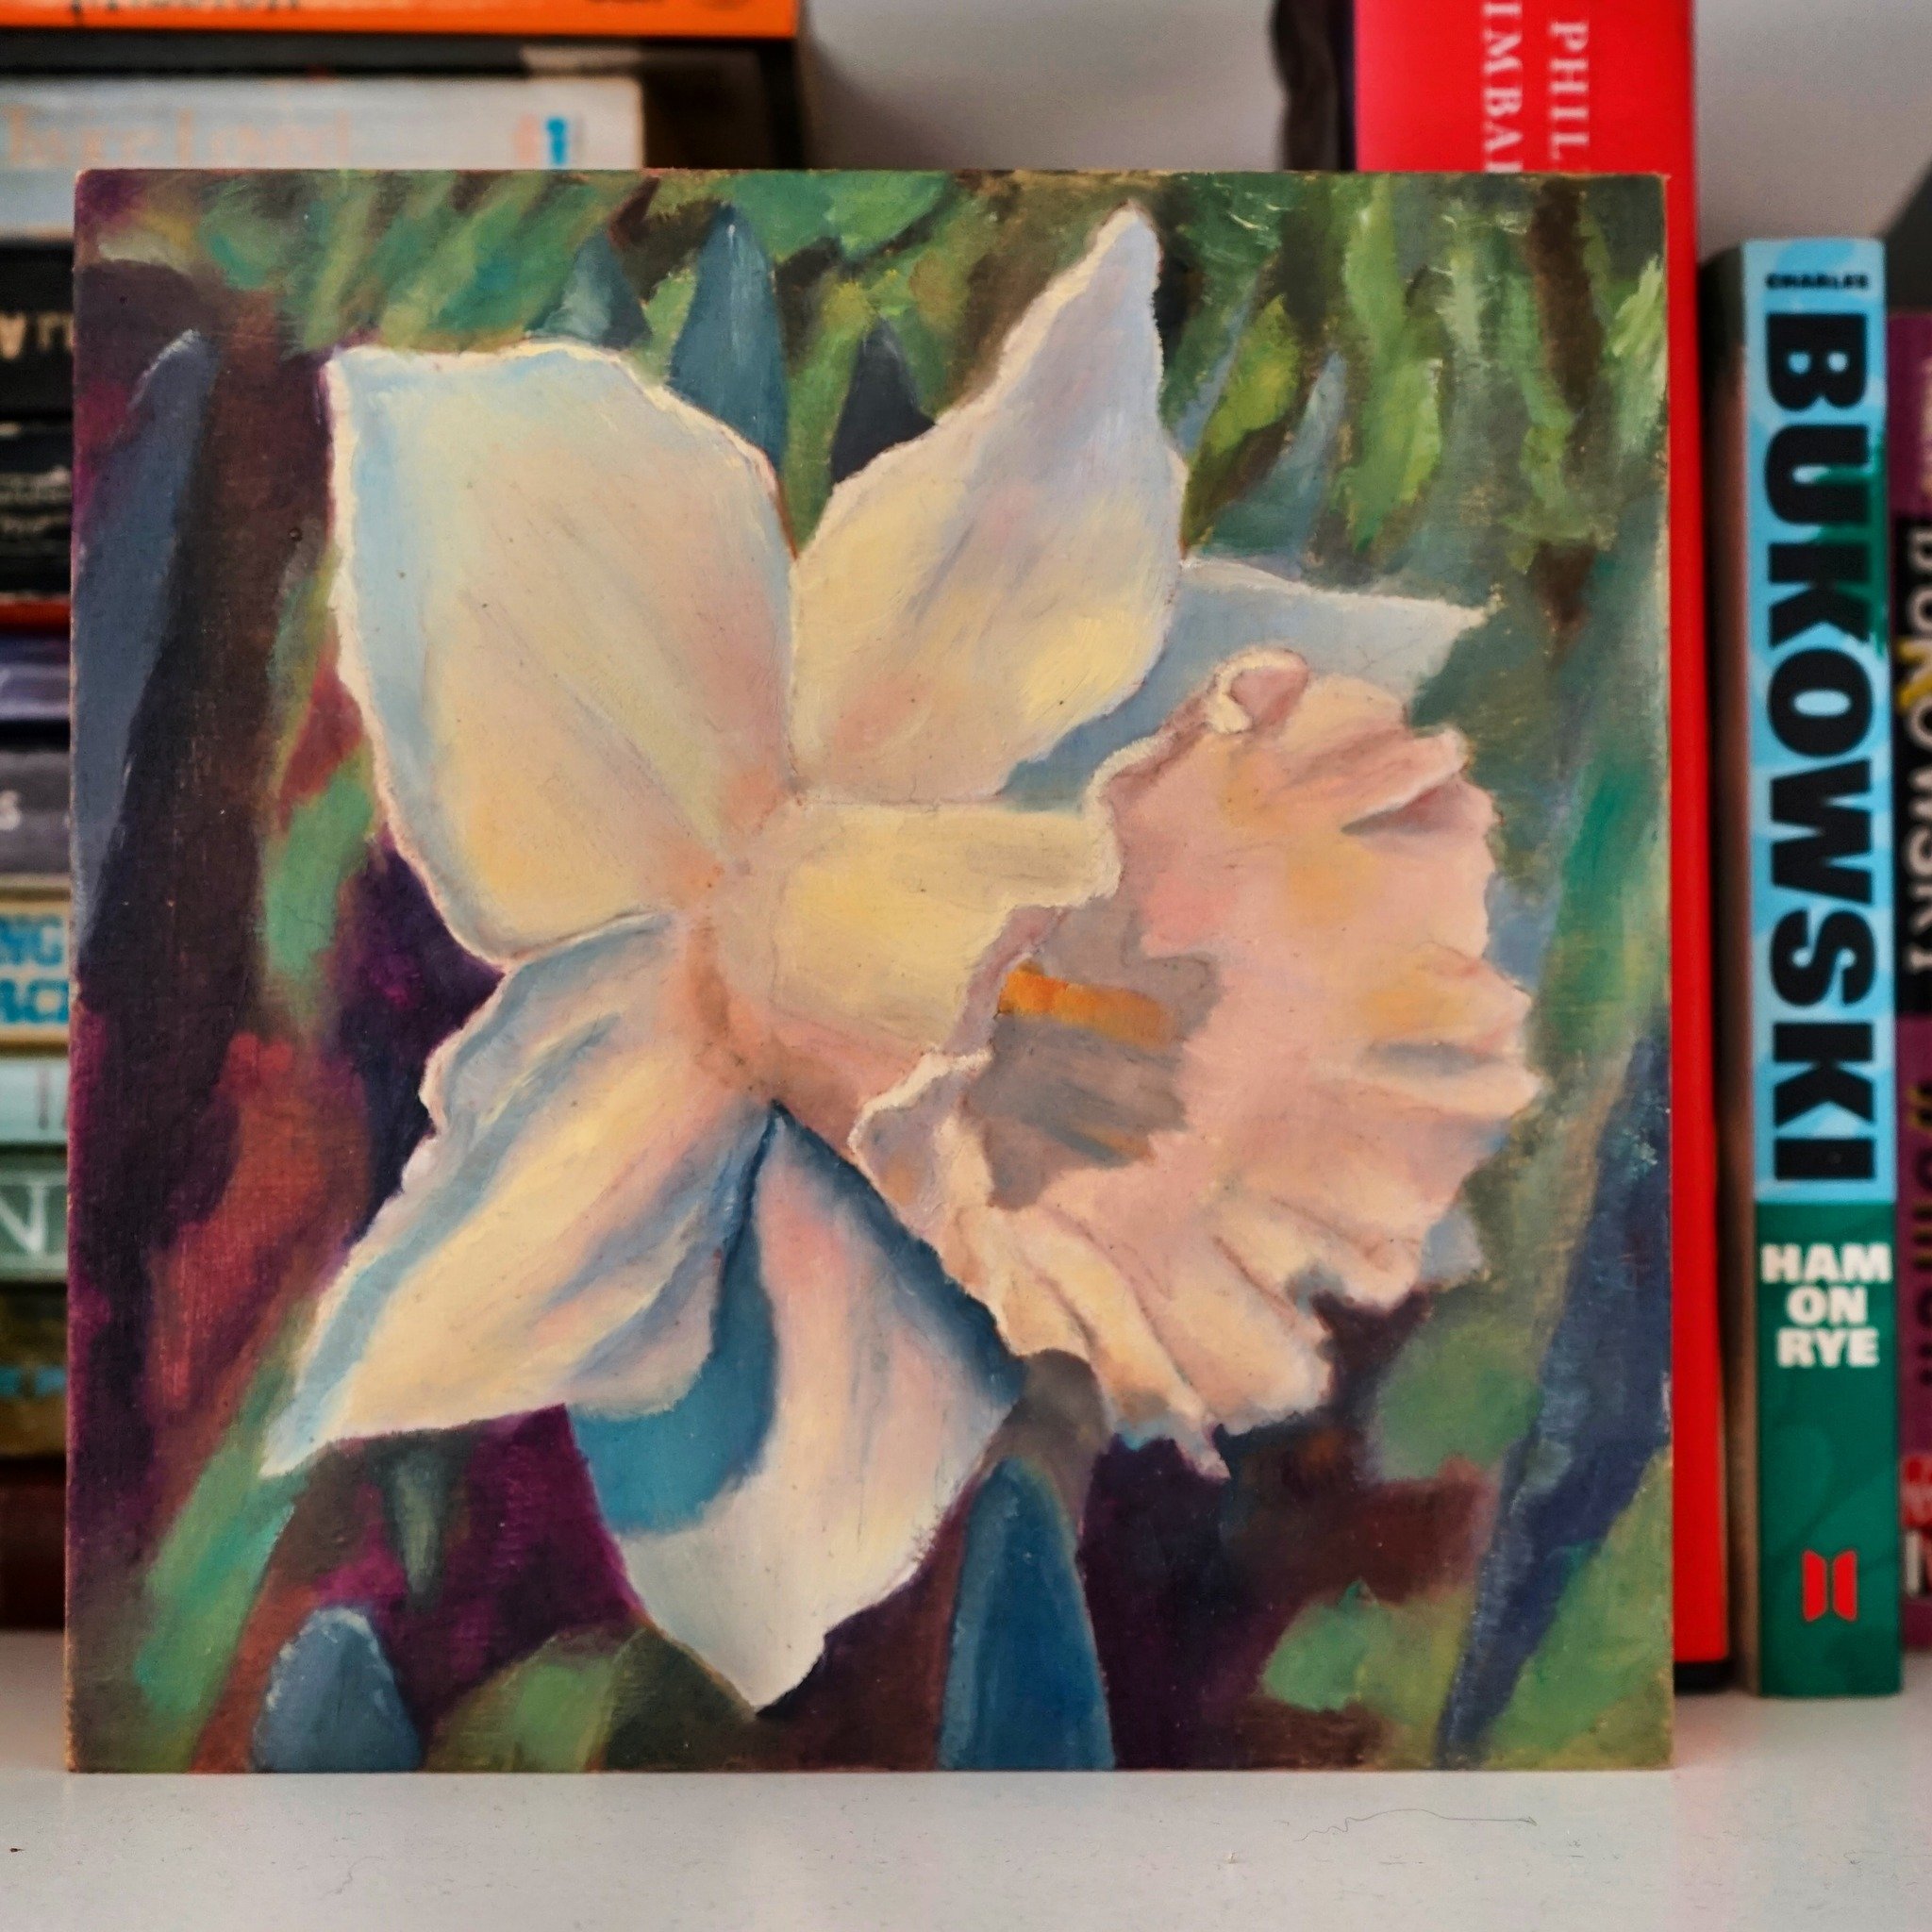 This painting of a wild daffodil (along with many others) will be on display at the @affordableartfairau in Brisbane from May 9-12th along with @claudiokirac @caraasanderss and @camillemanley_art as part of @mintarthouse